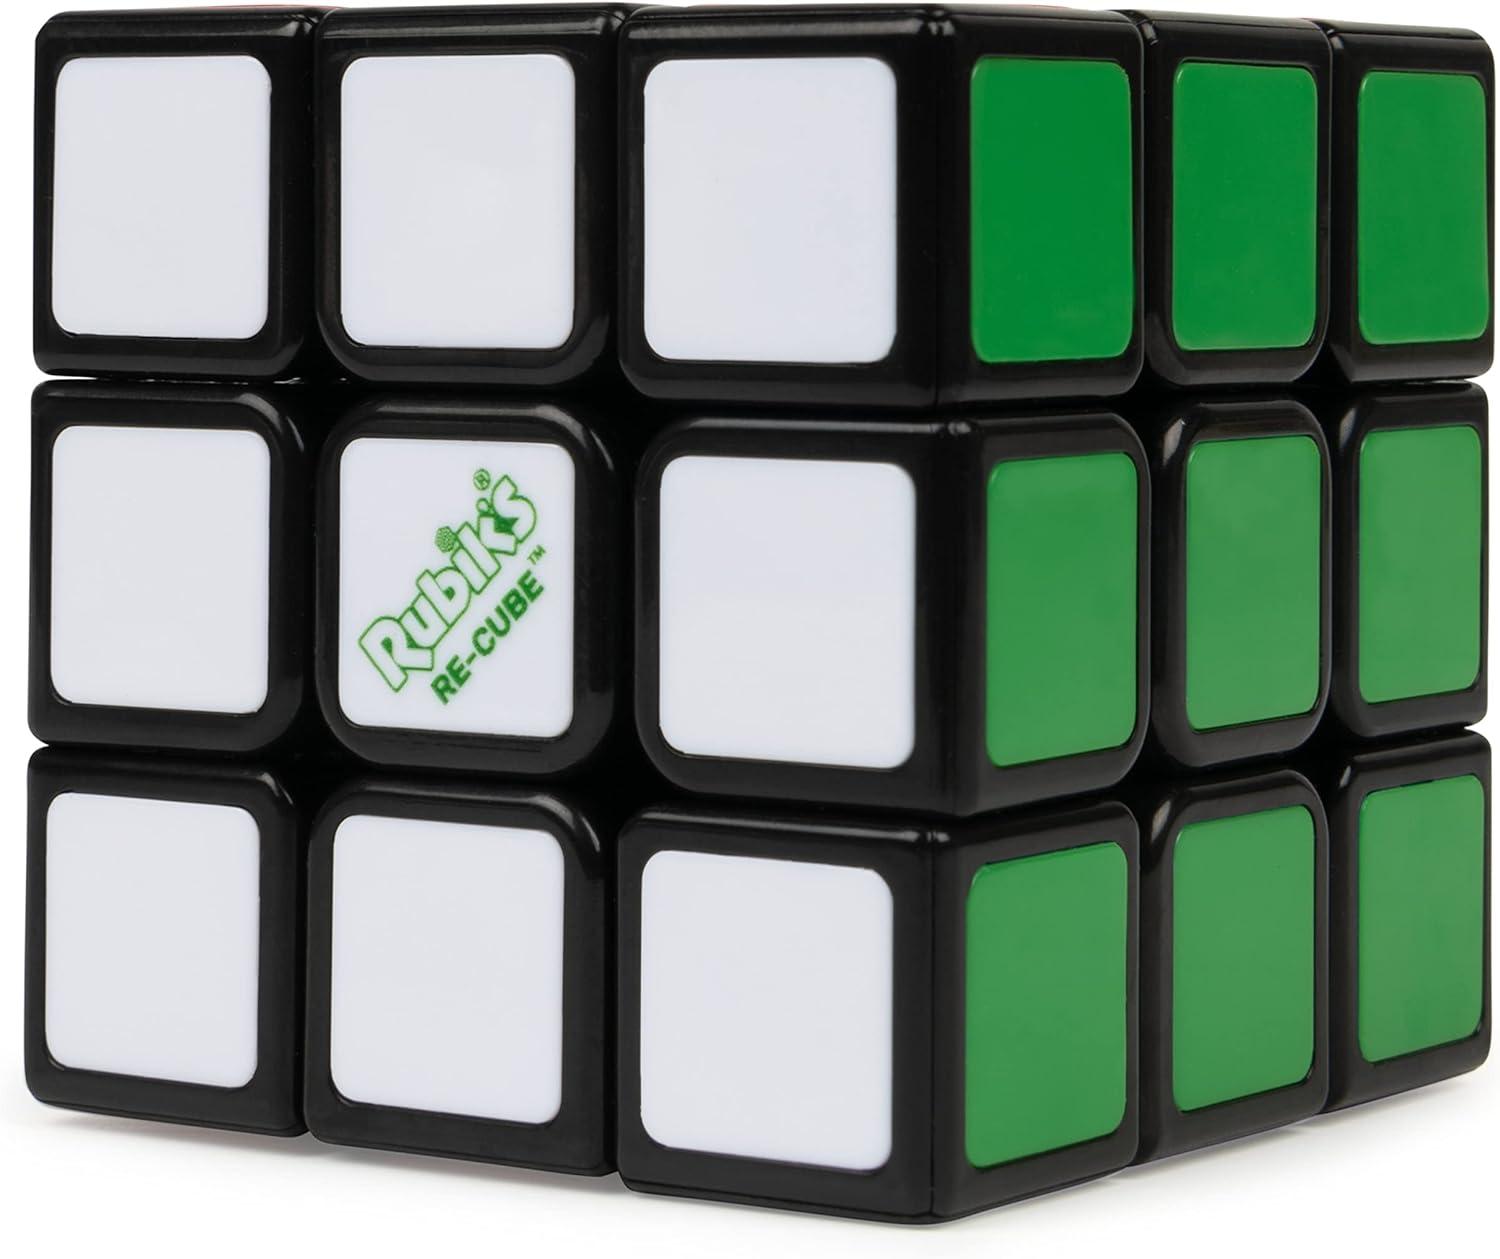 Rubiks Re-Cube The Original 3x3 3D Puzzle Travel Game for $5.20